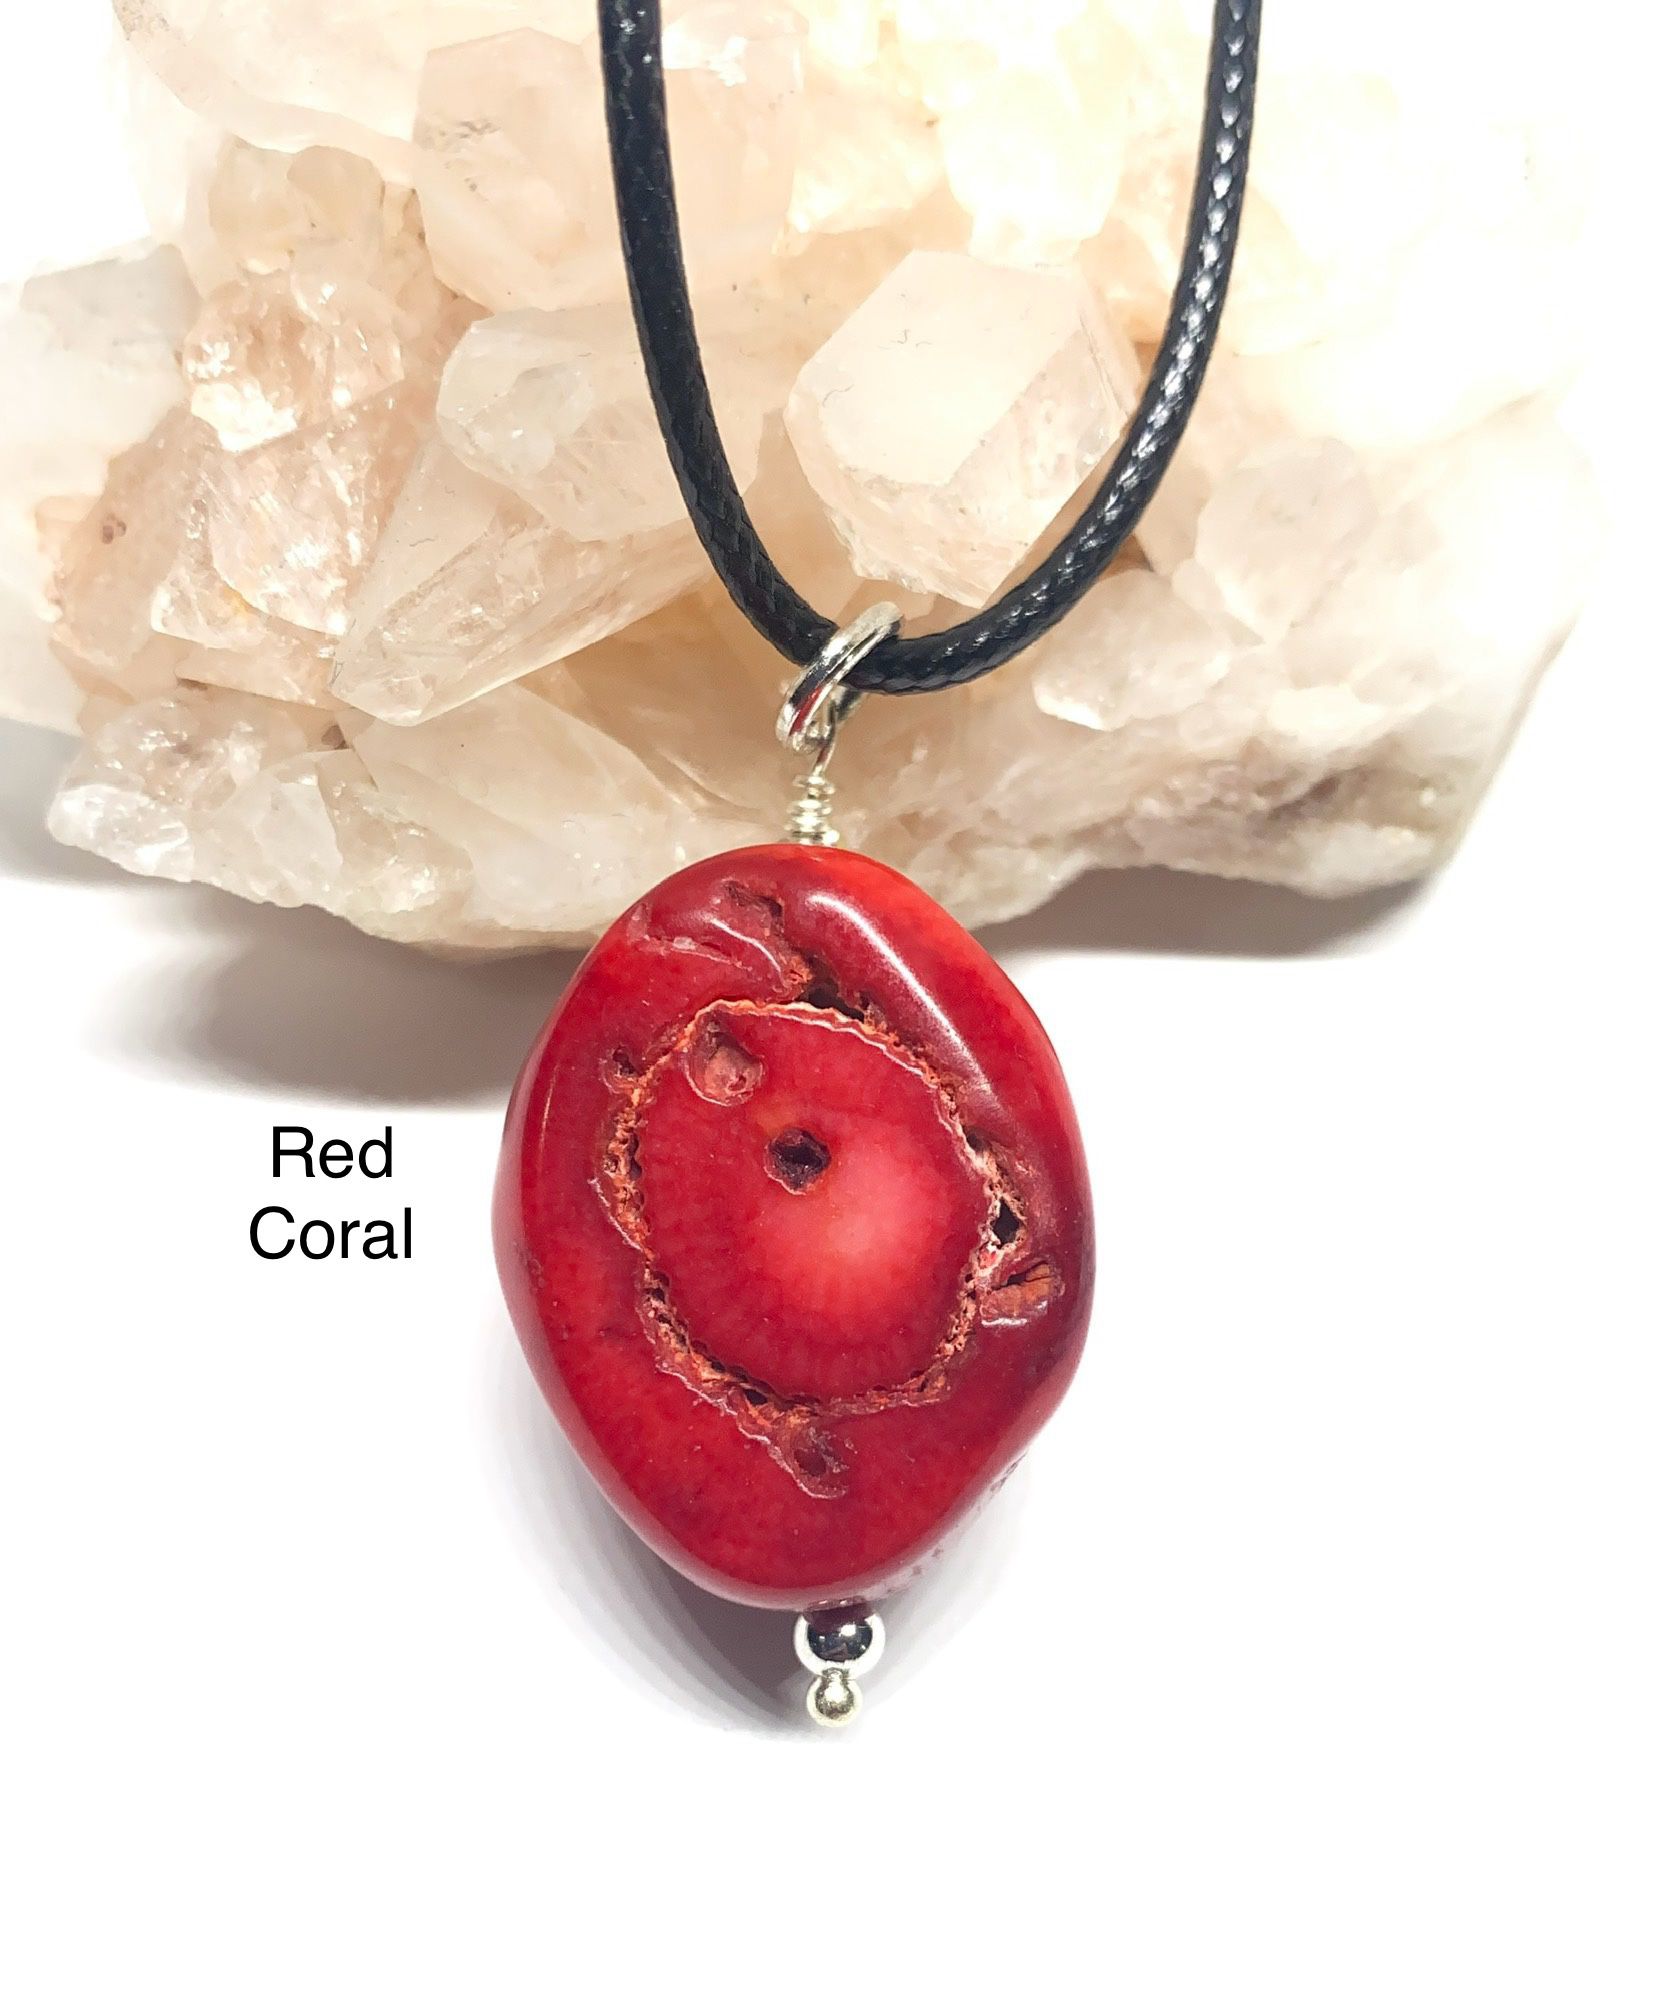 Red Genuine Coral Pendant Necklace with Black Leather Cord